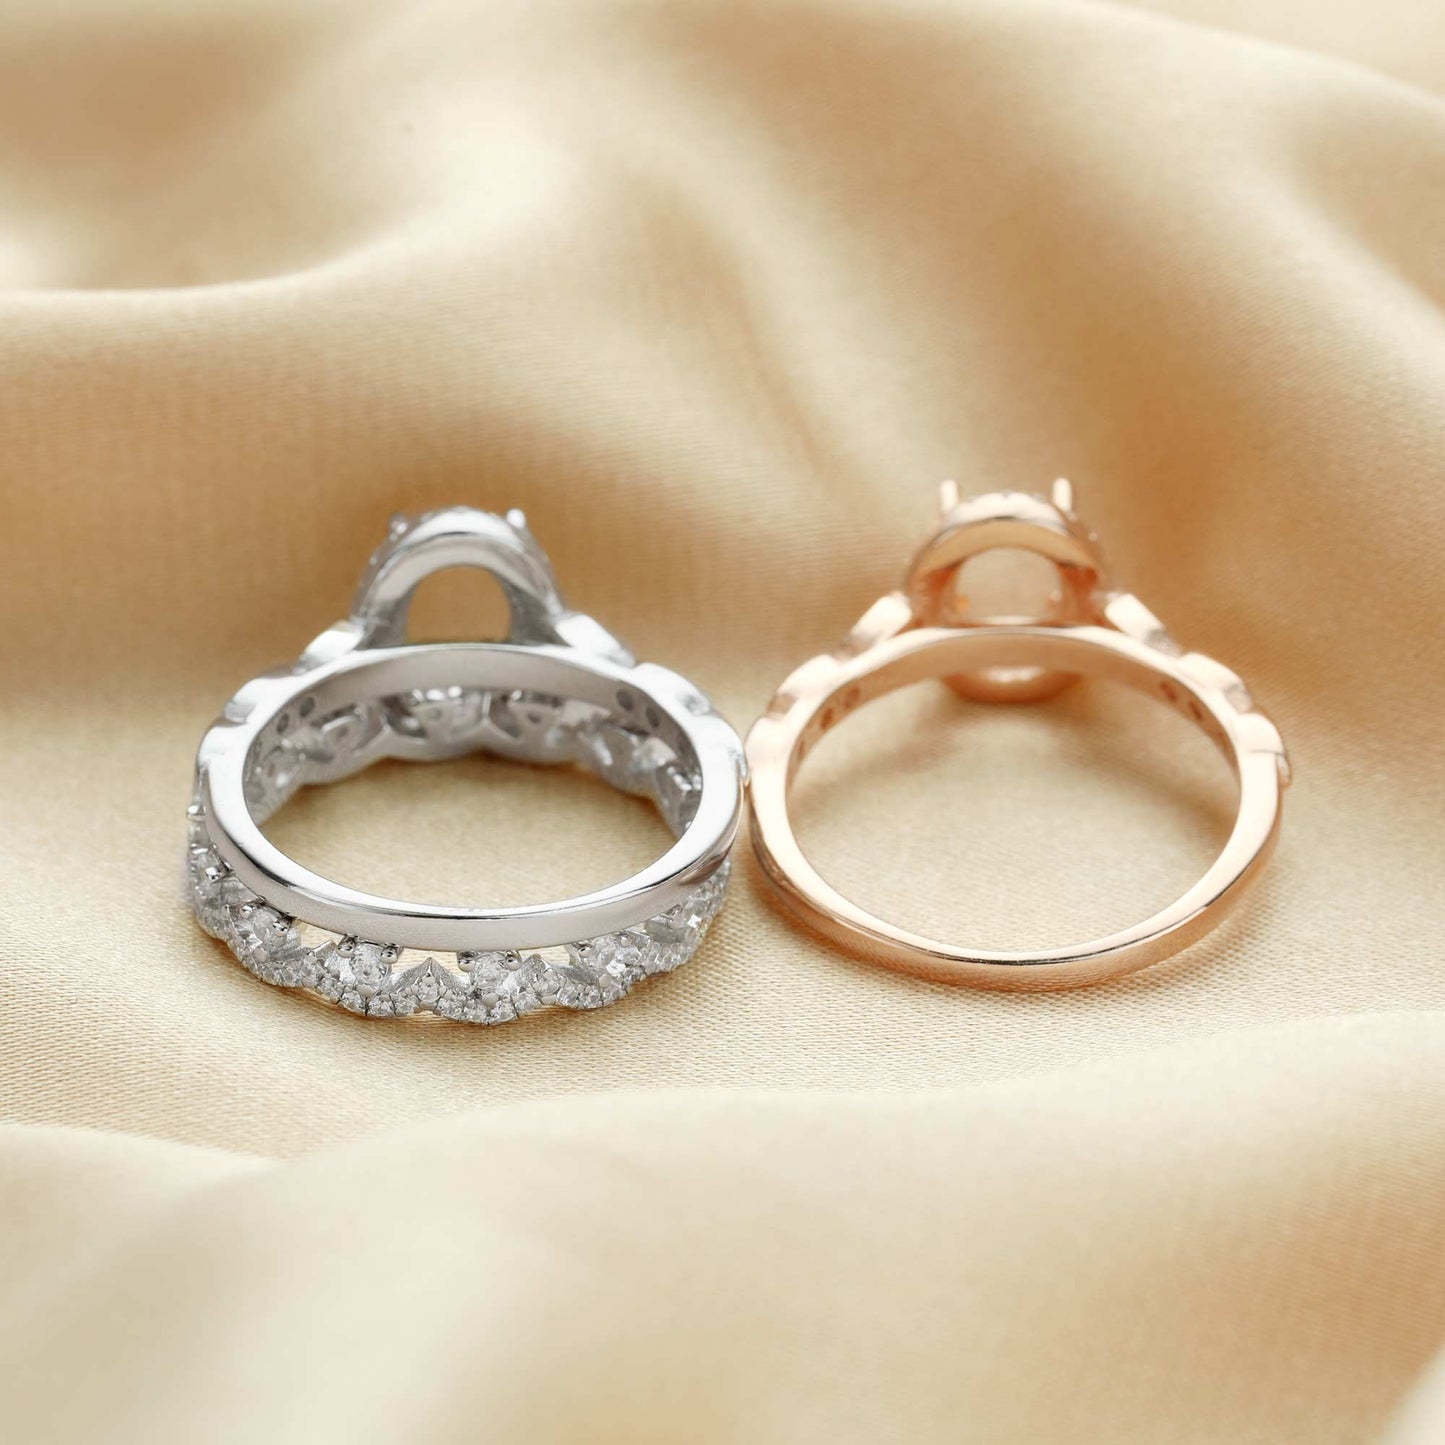 Silver 3 Piece wedding semi mount set  and rose gold halo engagement ring.